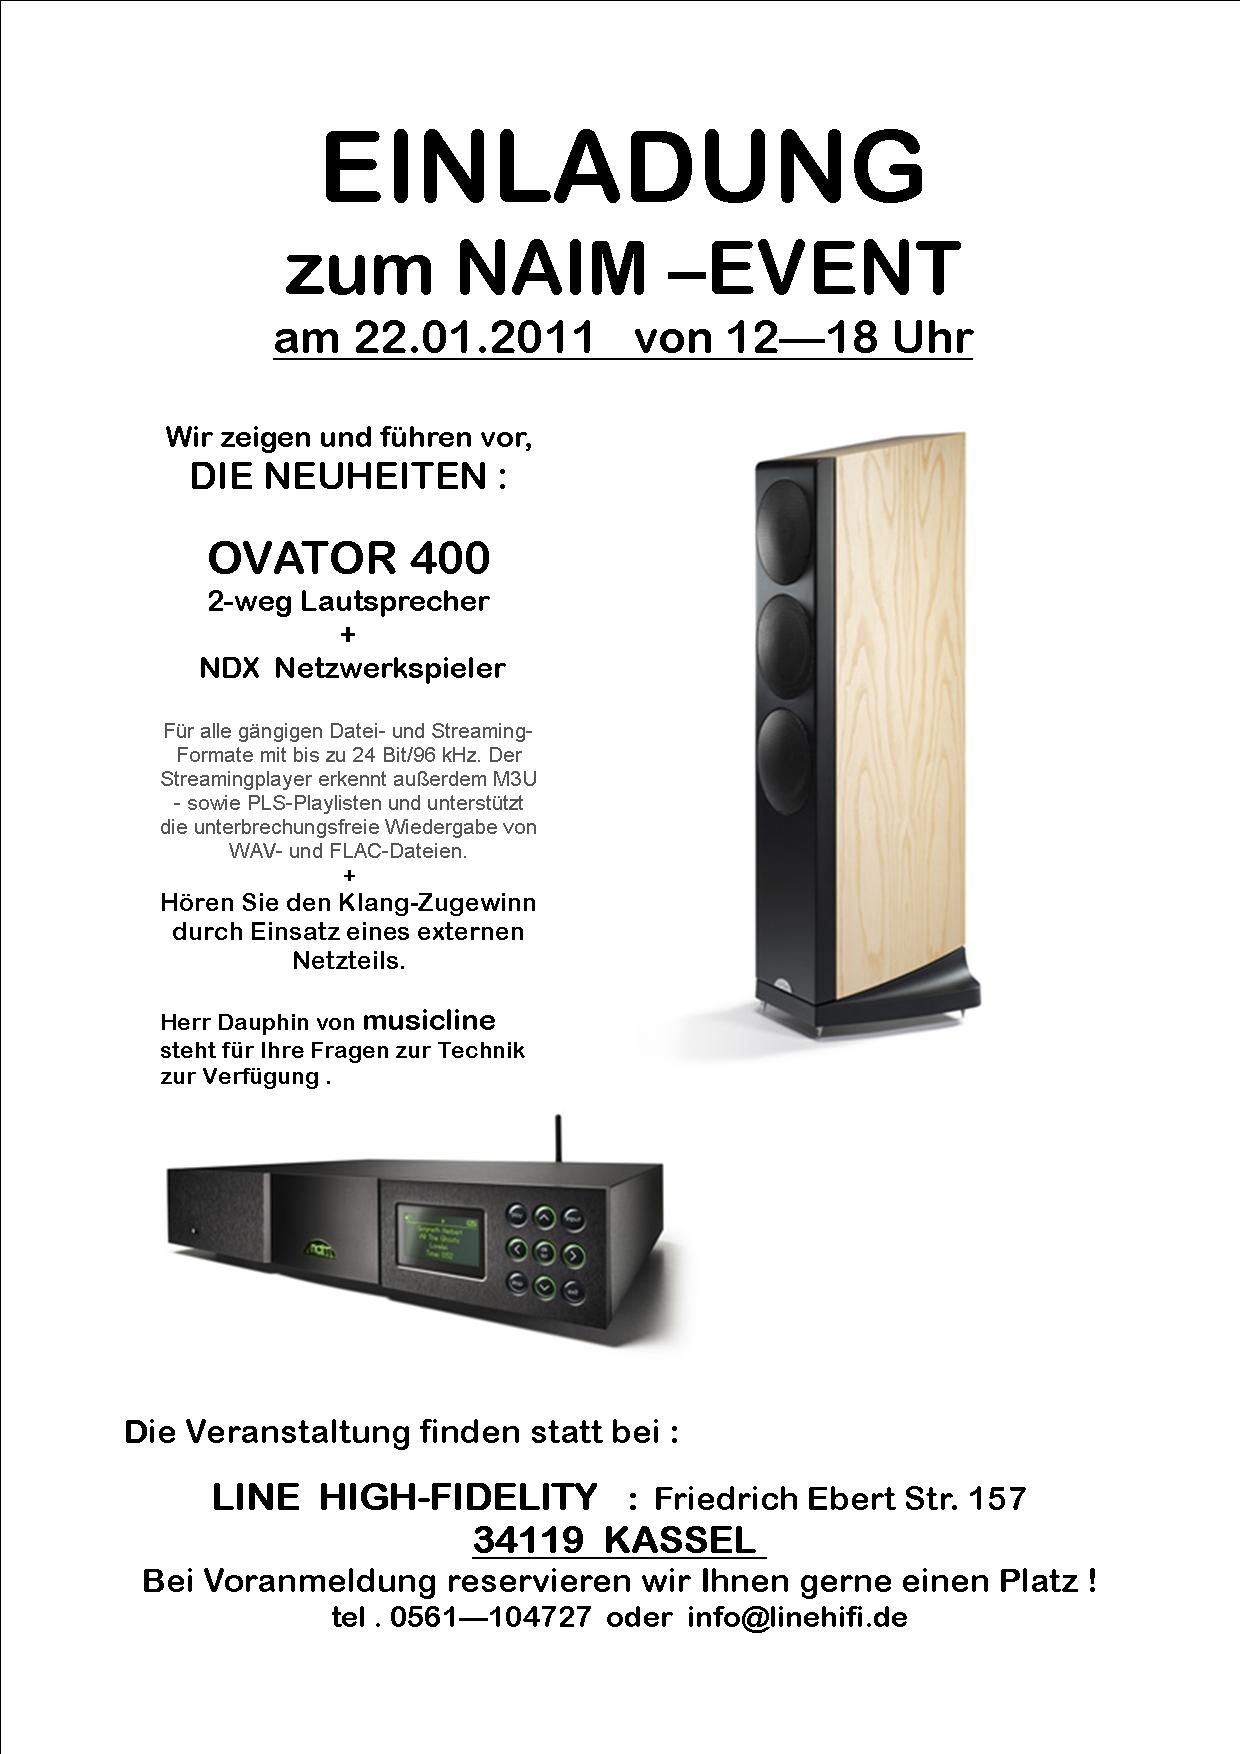 *** NAIM EVENT    22.1.2011    bei  LINE HIGH-FIDELITY  in KASSEL ***